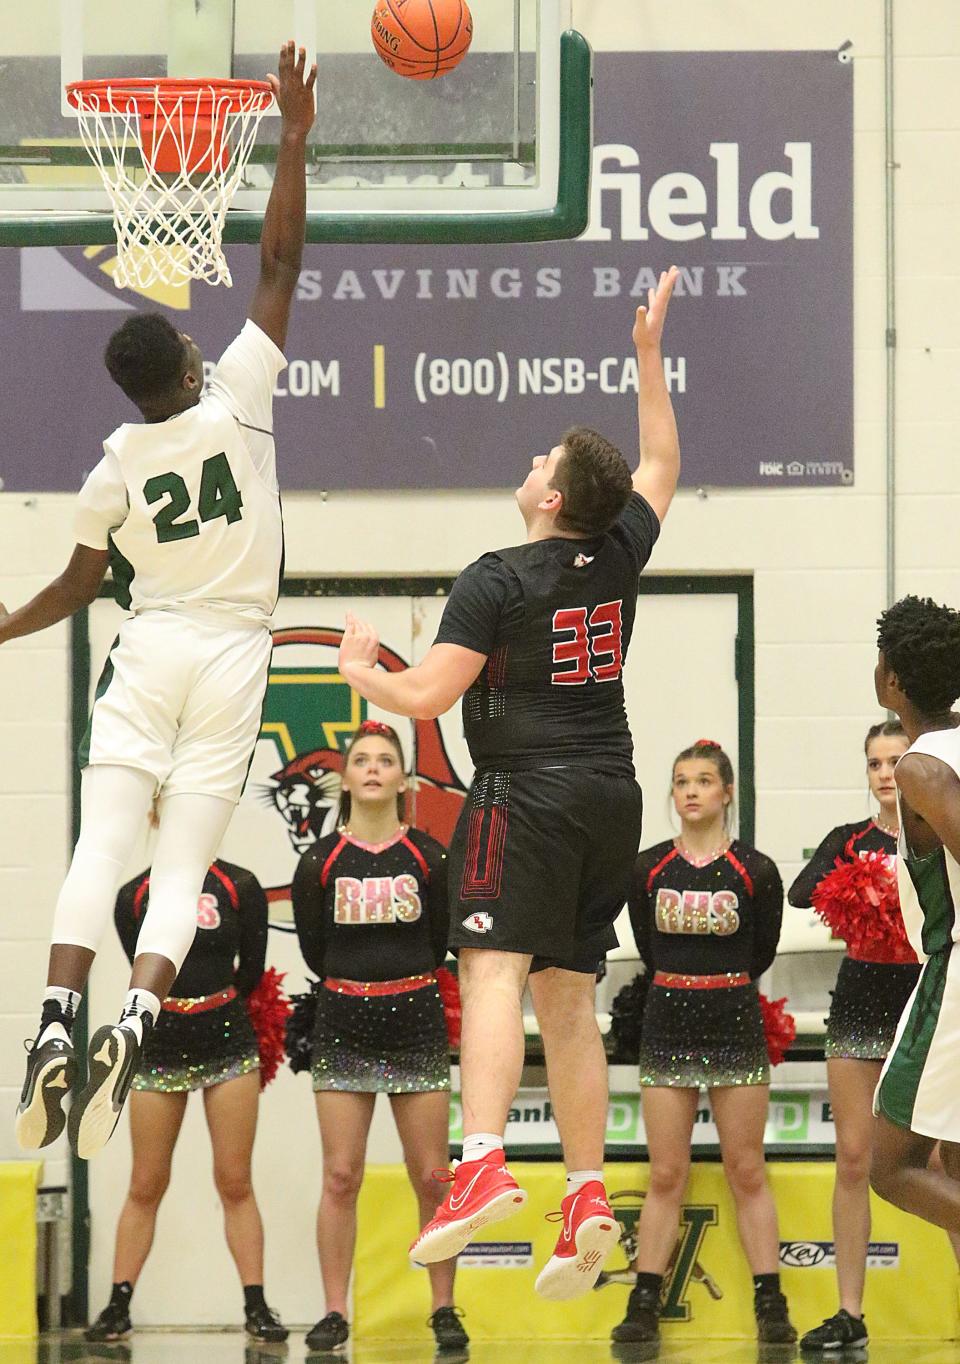 Rice's Mo Kanneh blocks Rutland's Luke DelBianco's shot during the Green Knights 45-41 win over the Raiders in the D1 Championship at UVM's Patrick Gym.